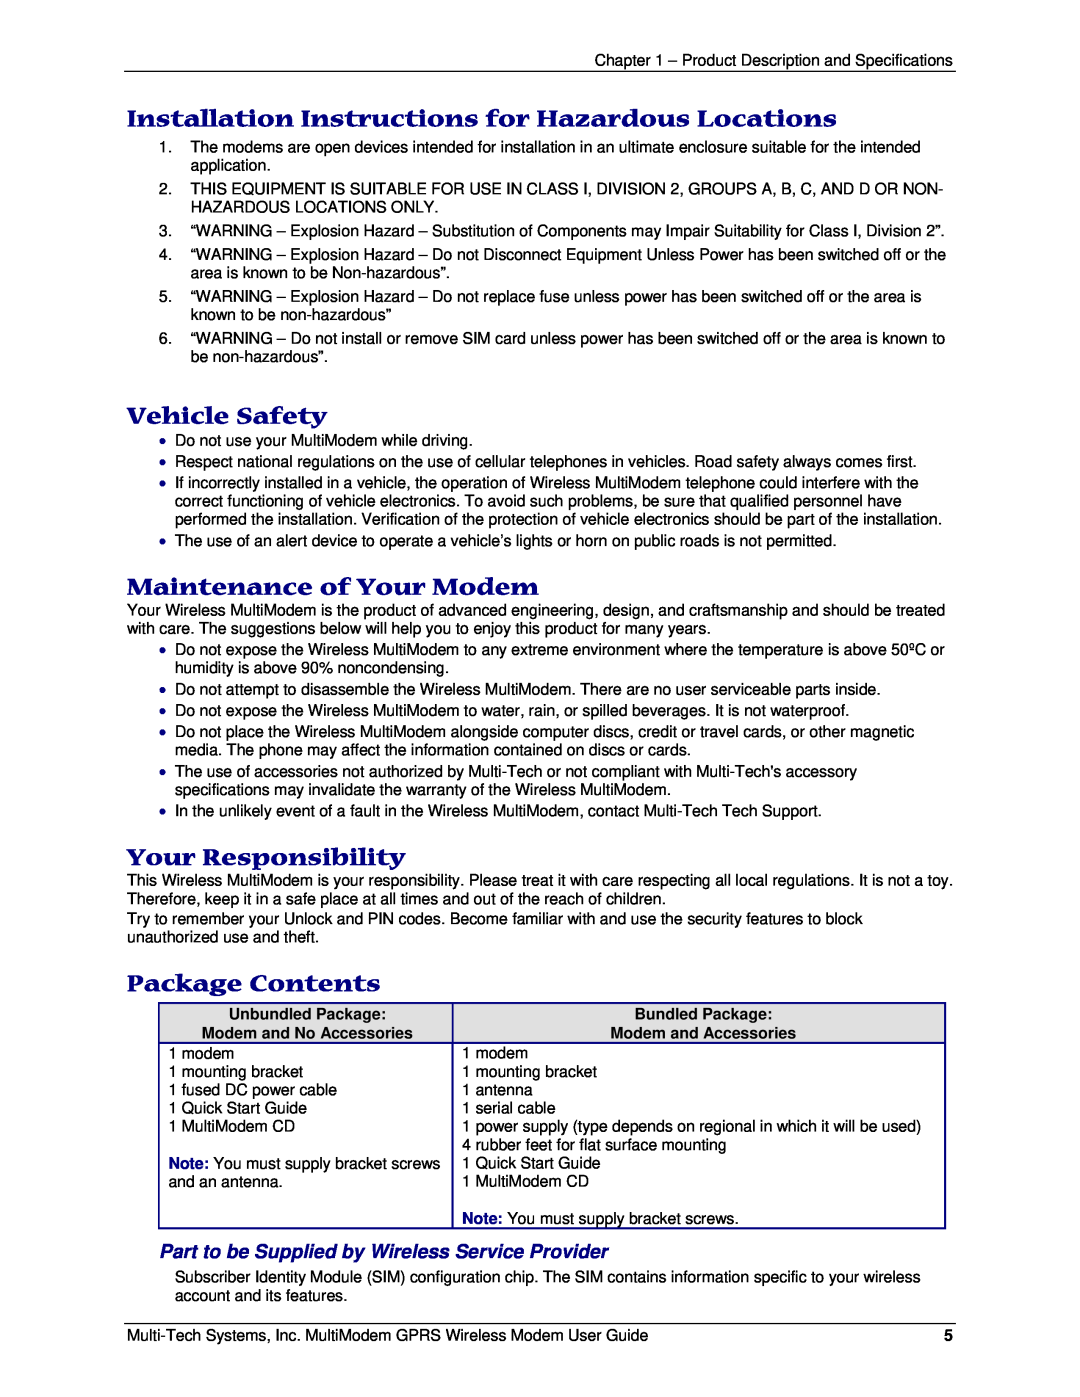 Multi-Tech Systems F2 manual Installation Instructions for Hazardous Locations, Vehicle Safety, Maintenance of Your Modem 